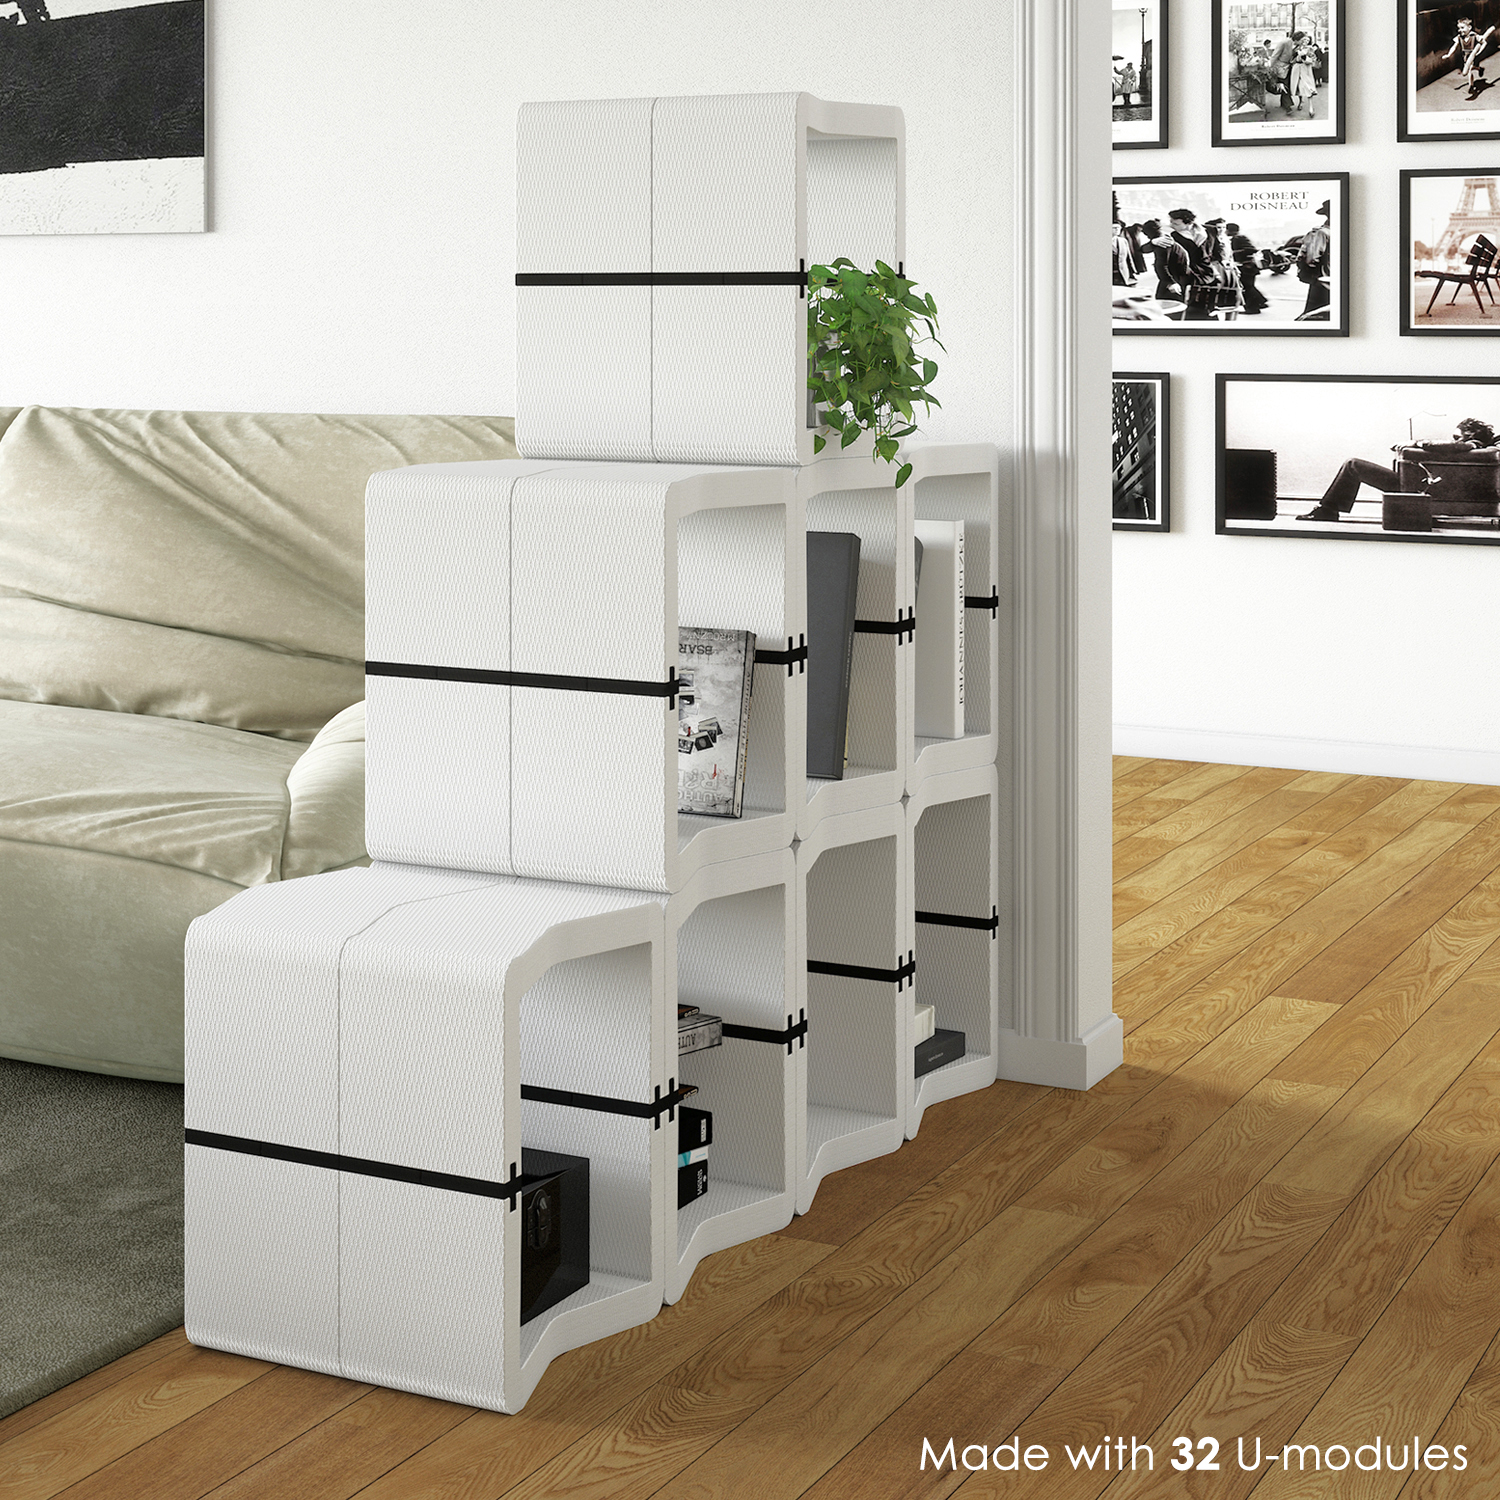 Room Divider By Movisi Order Now And Earn Flexibility And Great Design